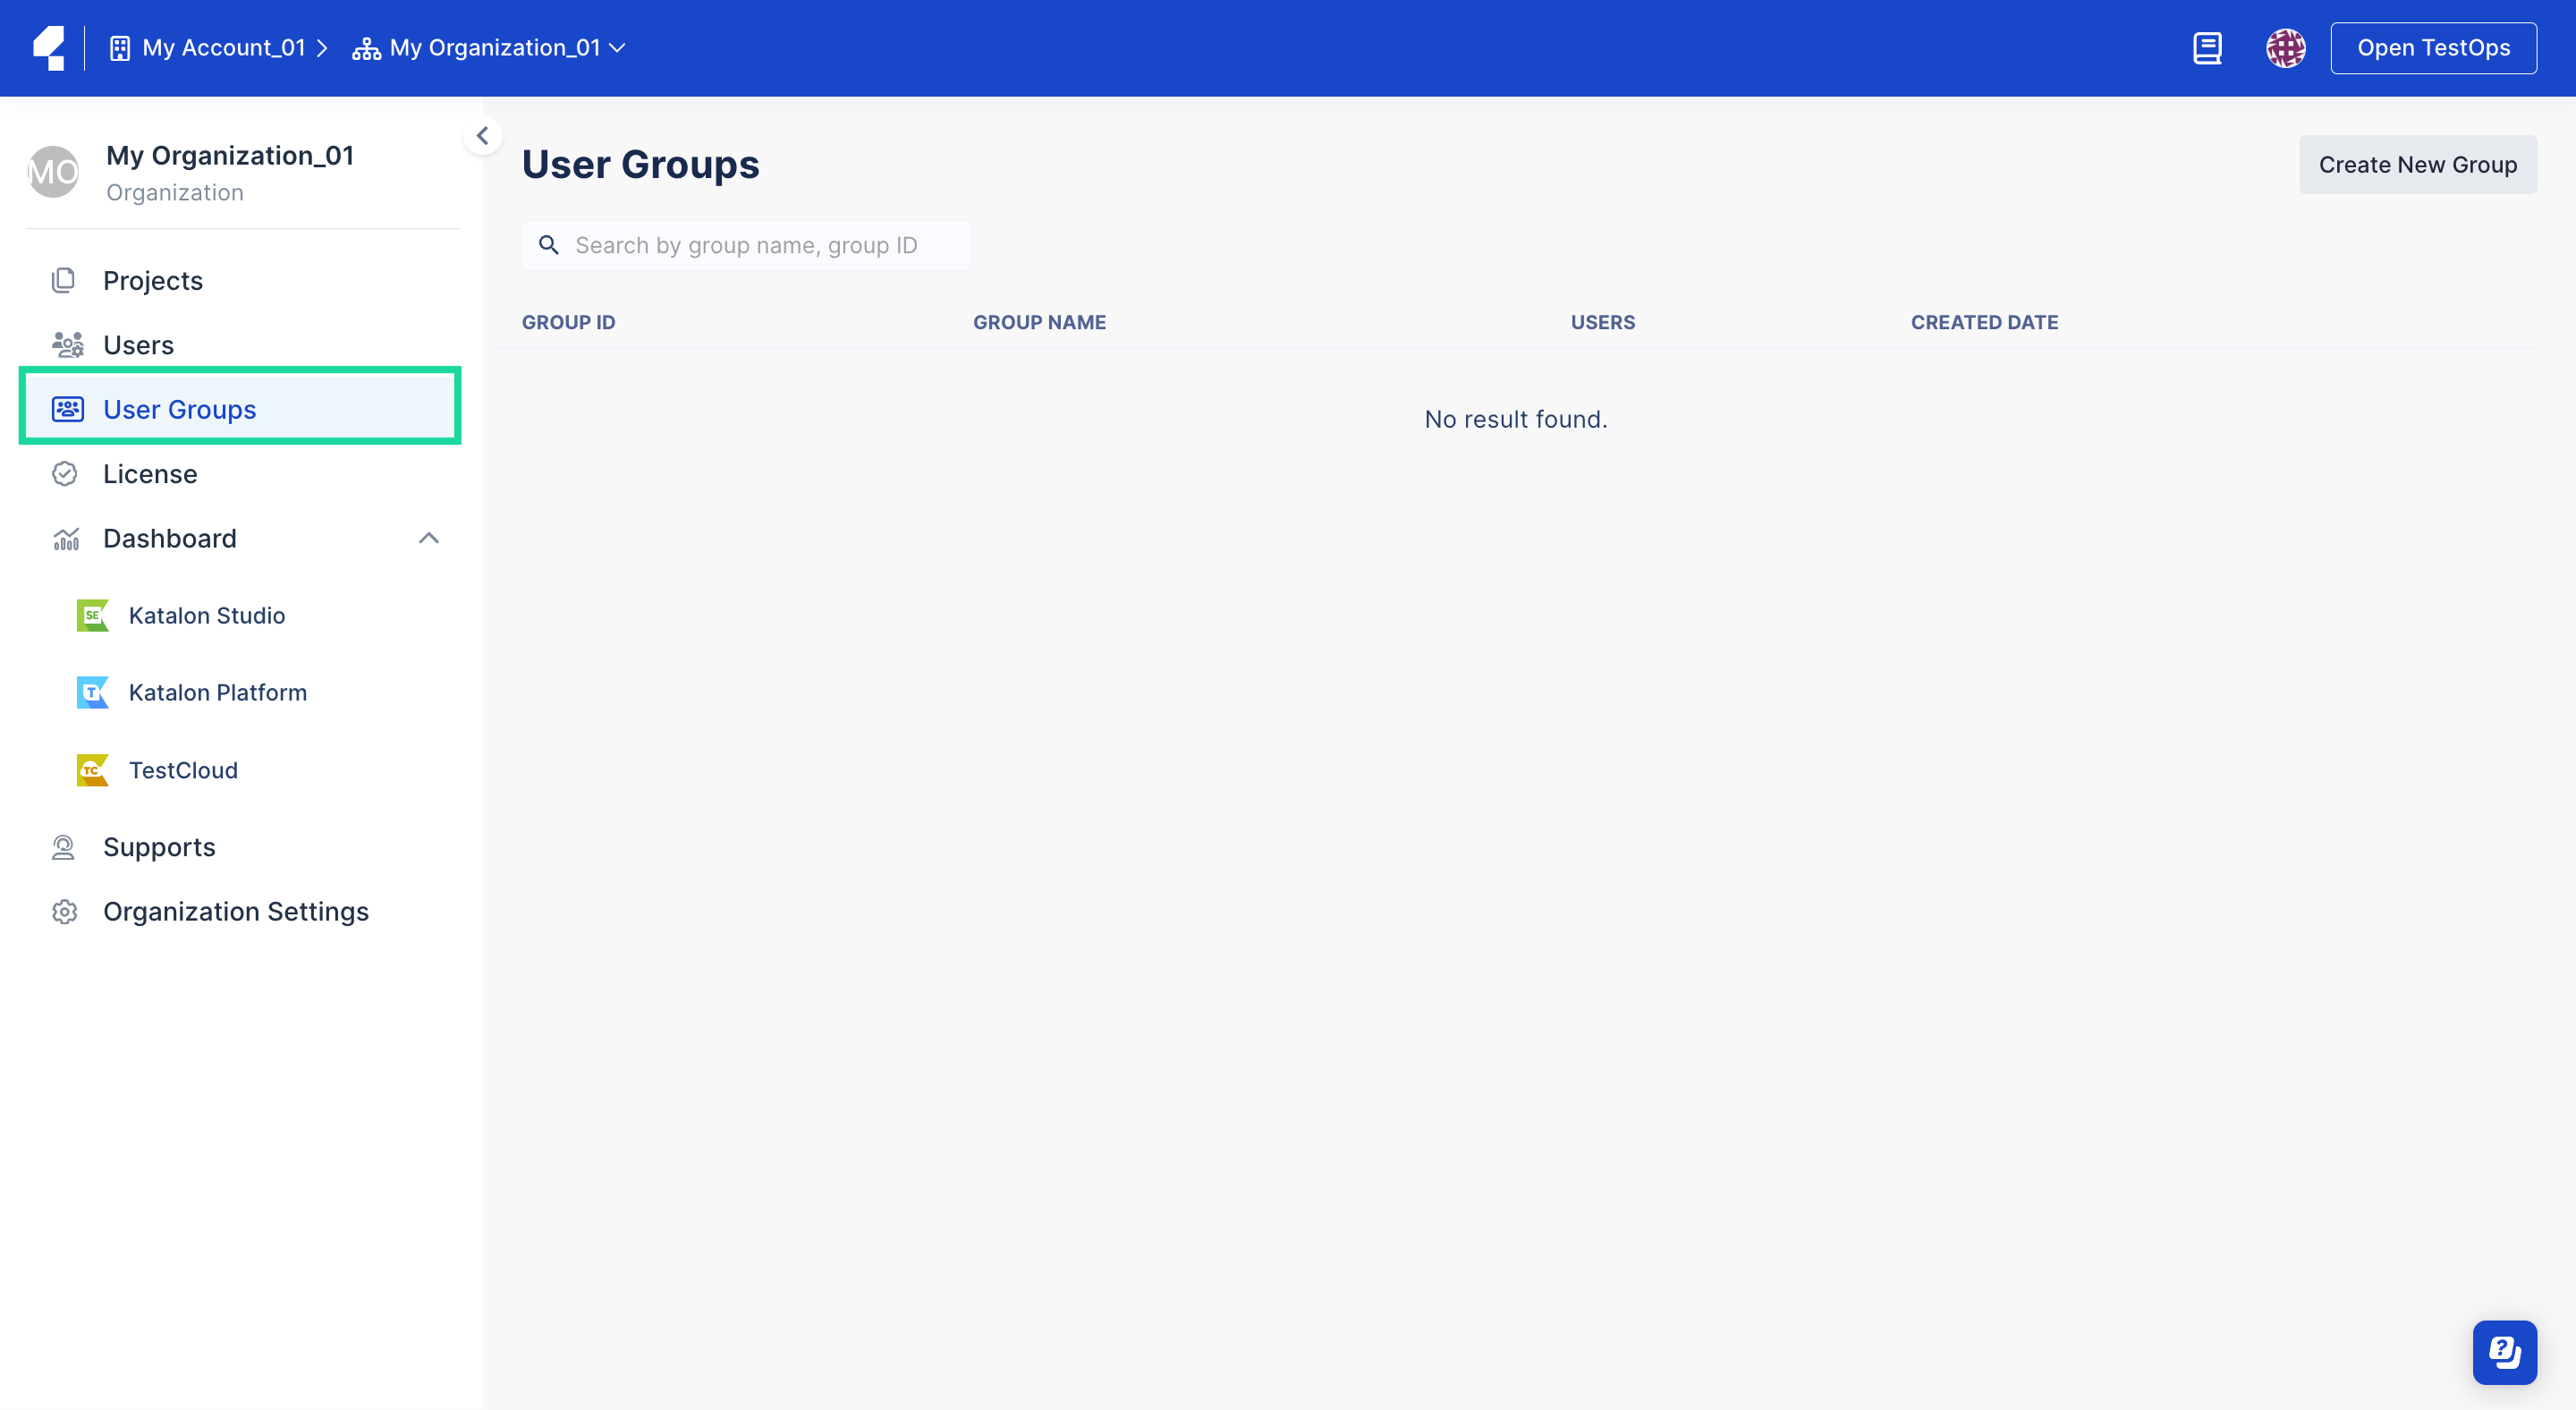 User Groups page